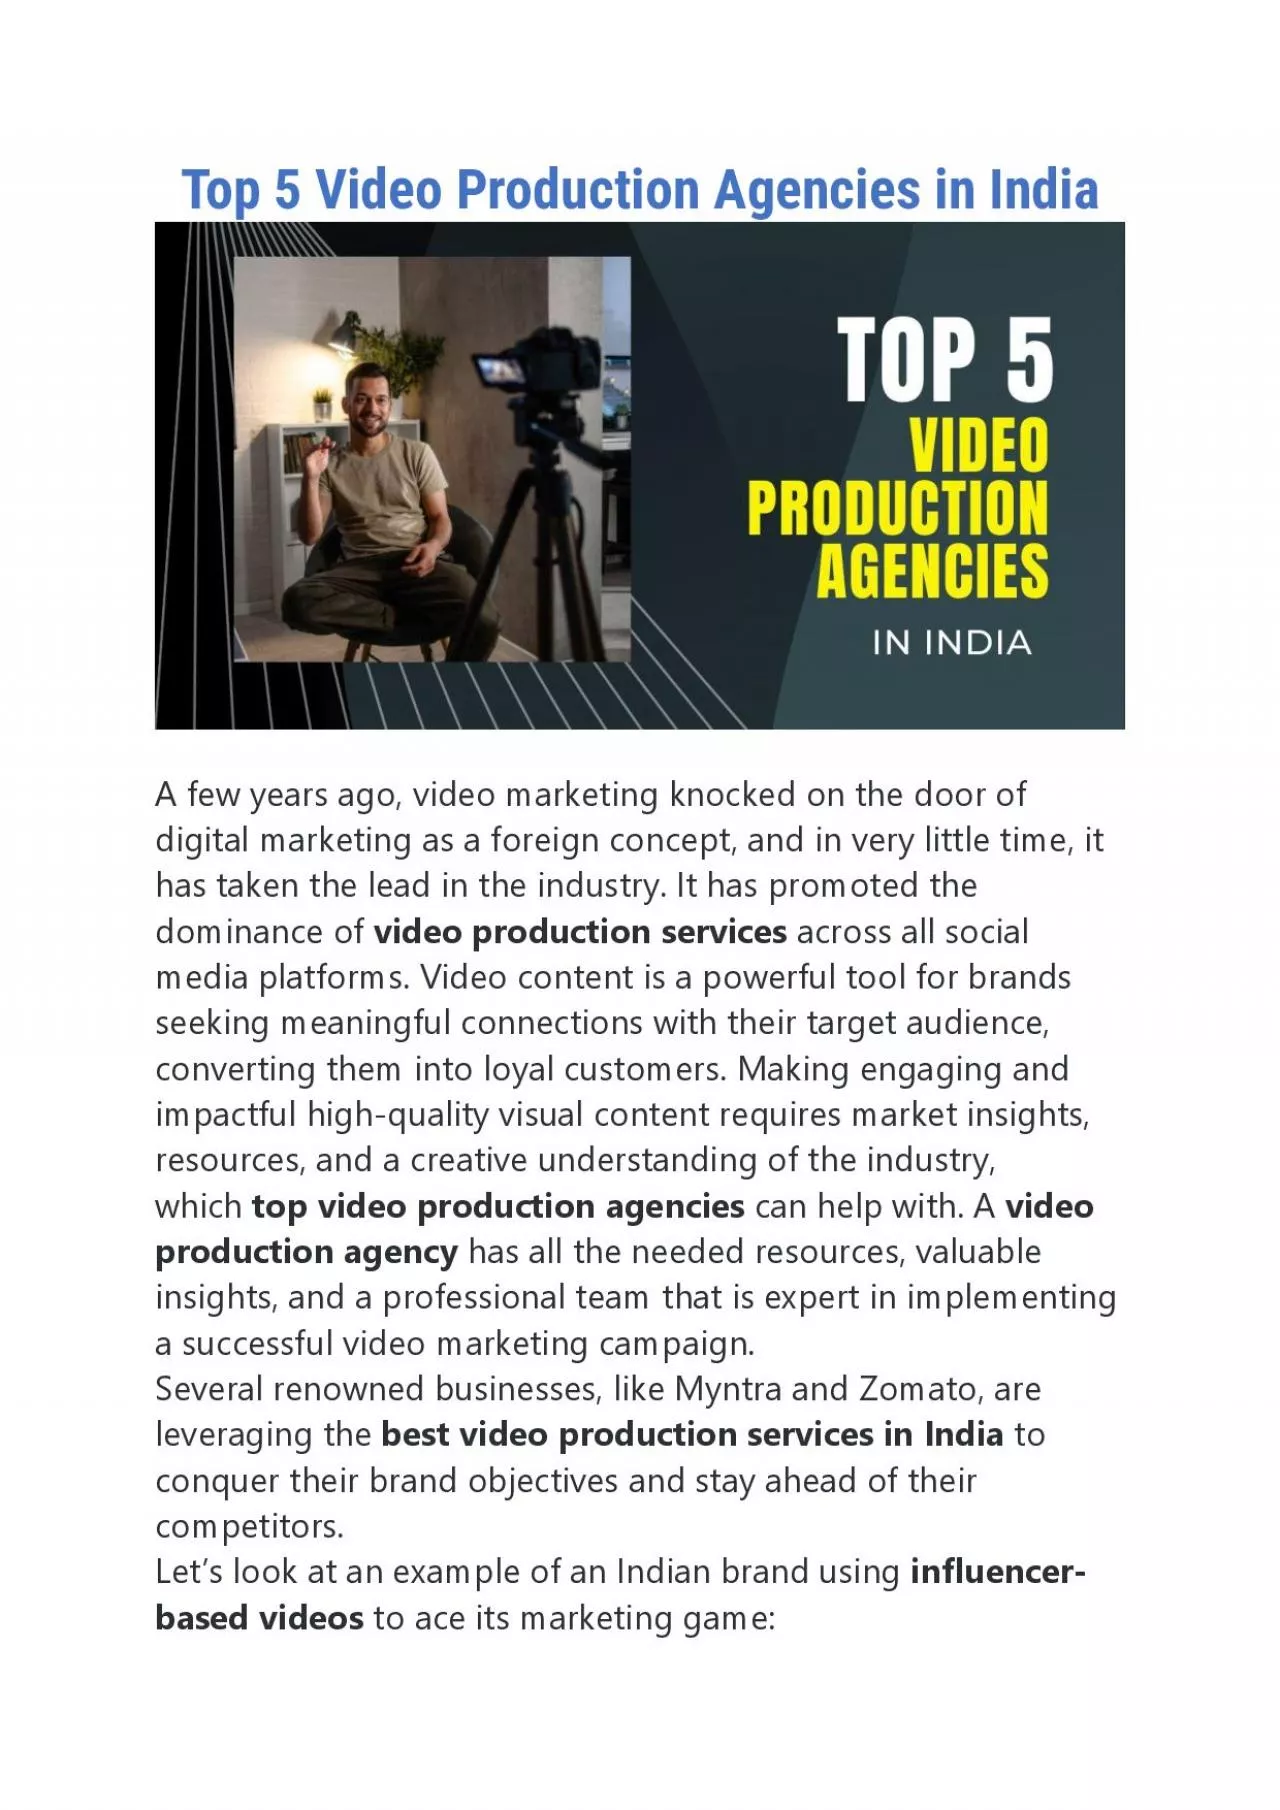 Top 5 Video Production Agencies in India